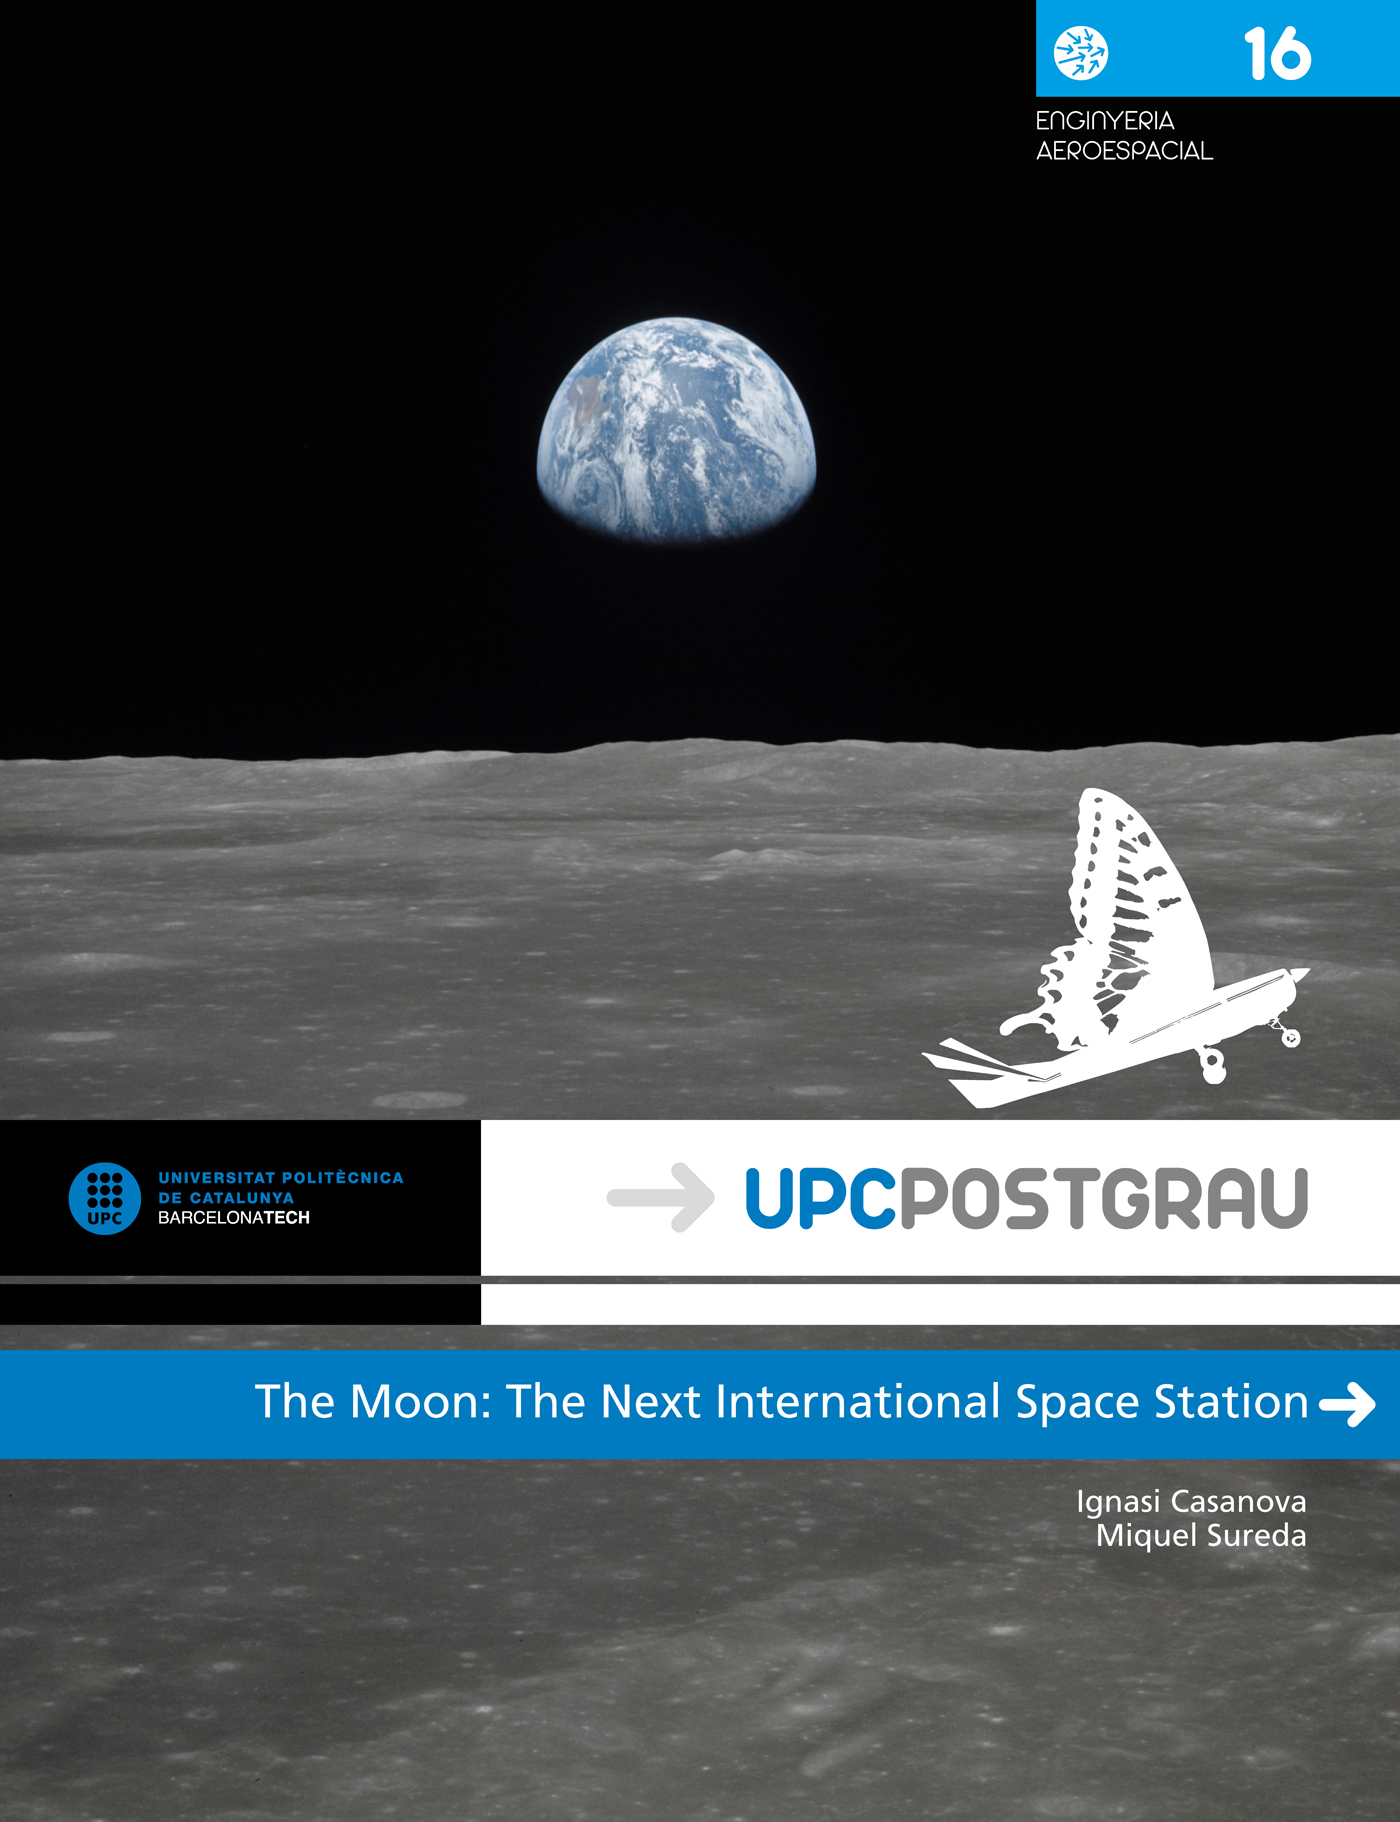 The Moon: The Next International Space Station